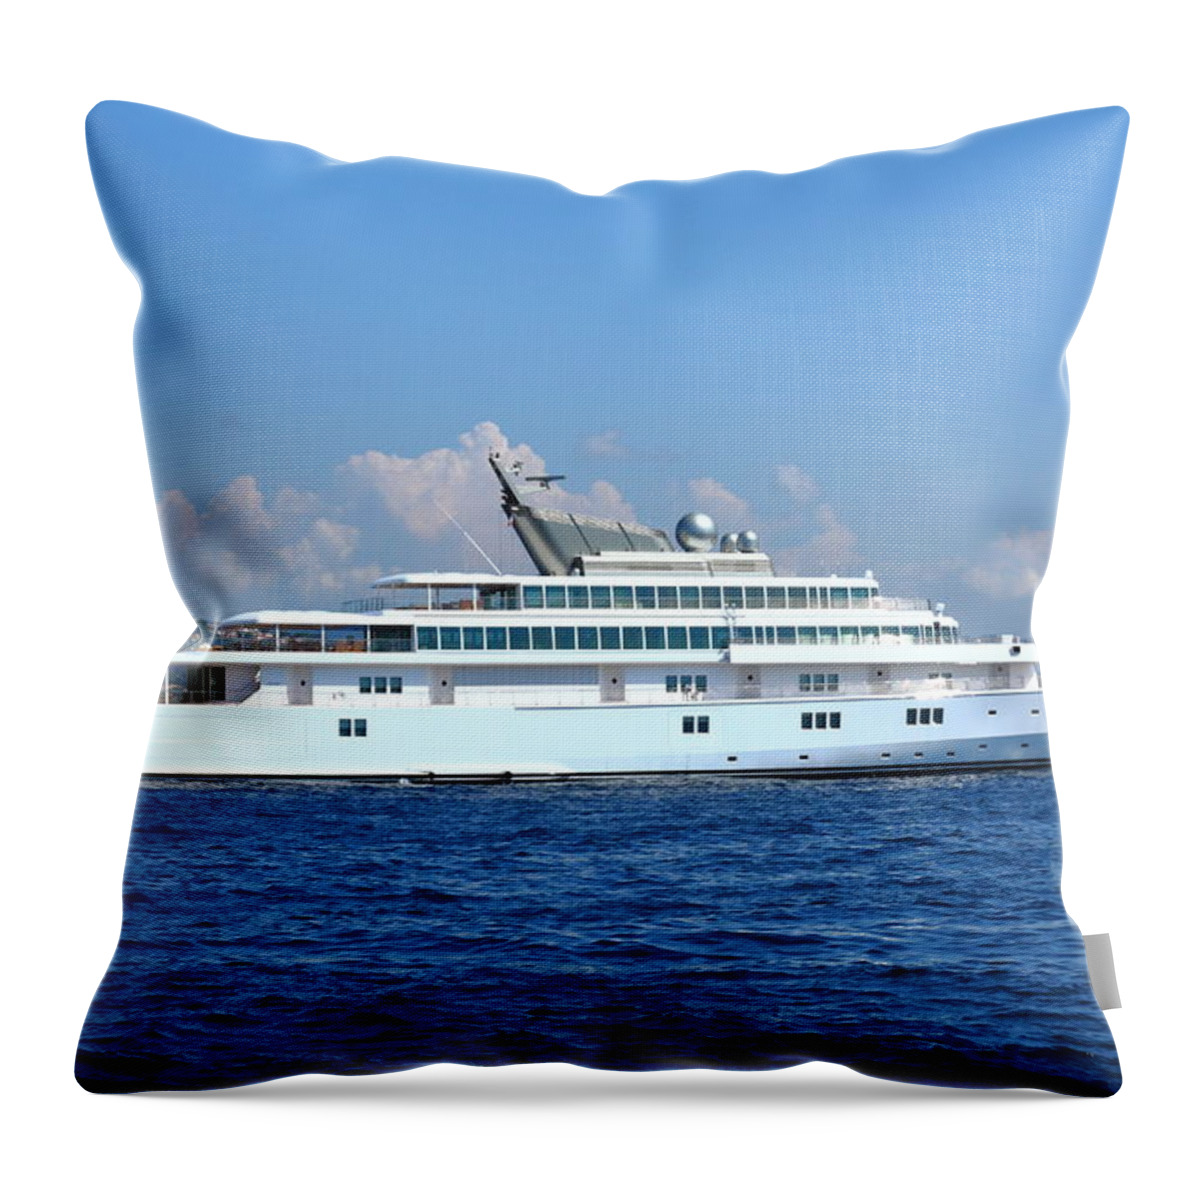 Super Throw Pillow featuring the photograph Super Yacht by Richard Patmore